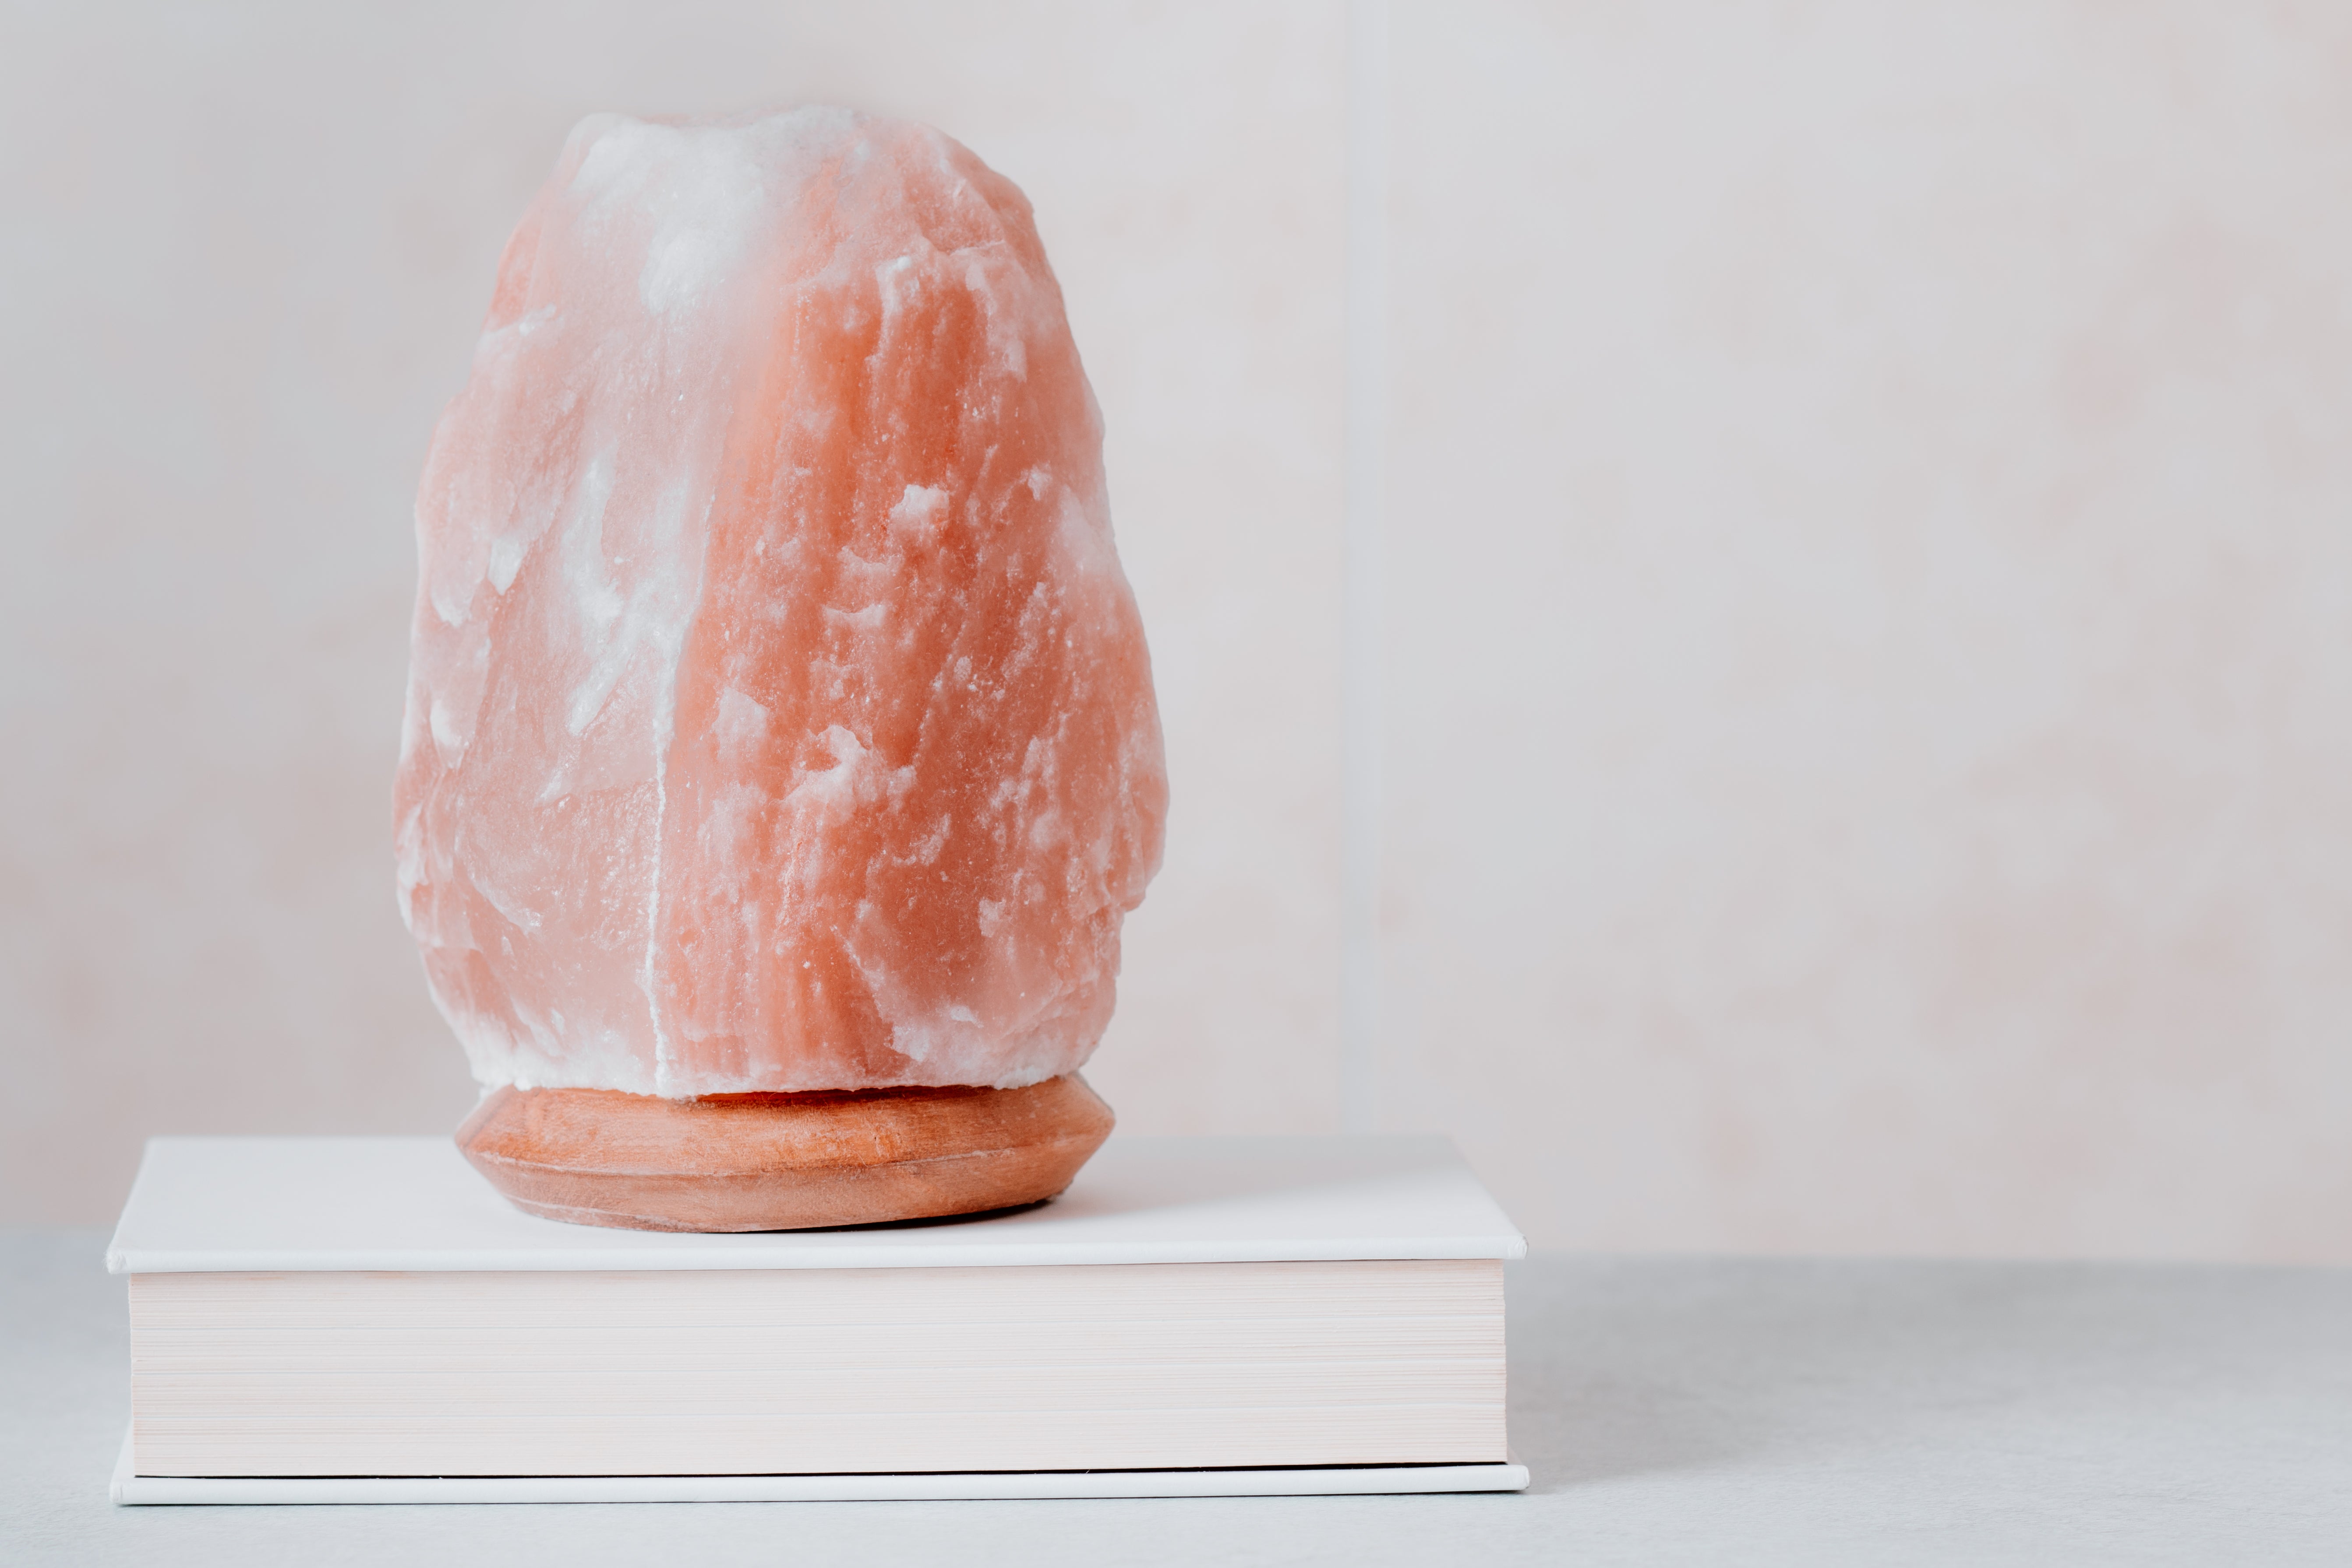 The most common issues with Himalayan Salt Lamps